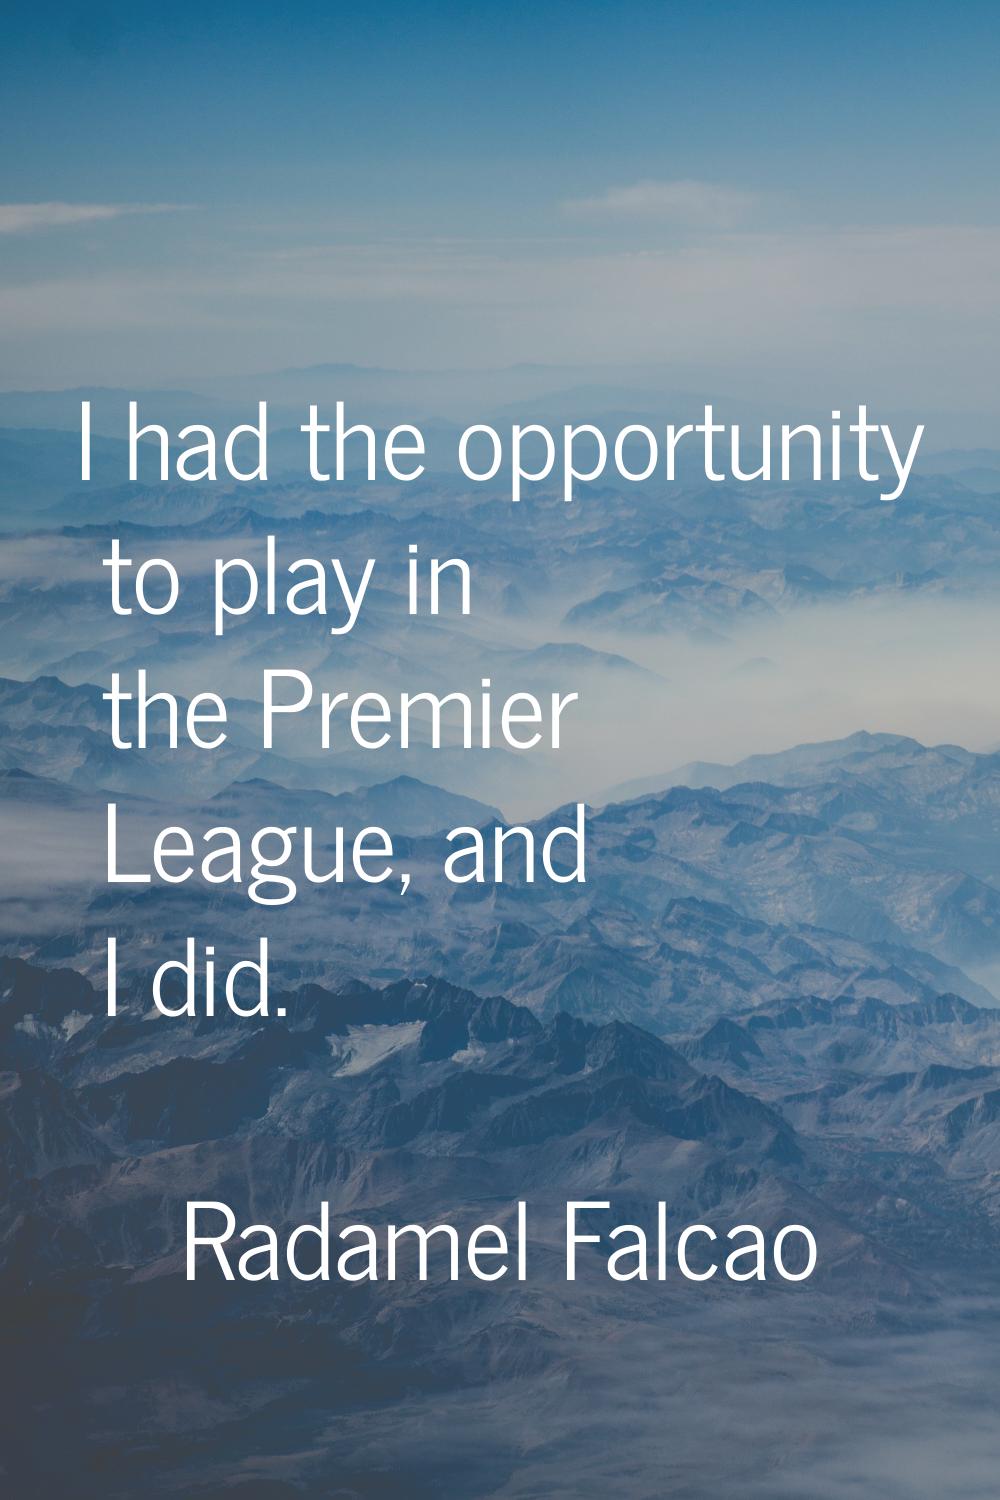 I had the opportunity to play in the Premier League, and I did.